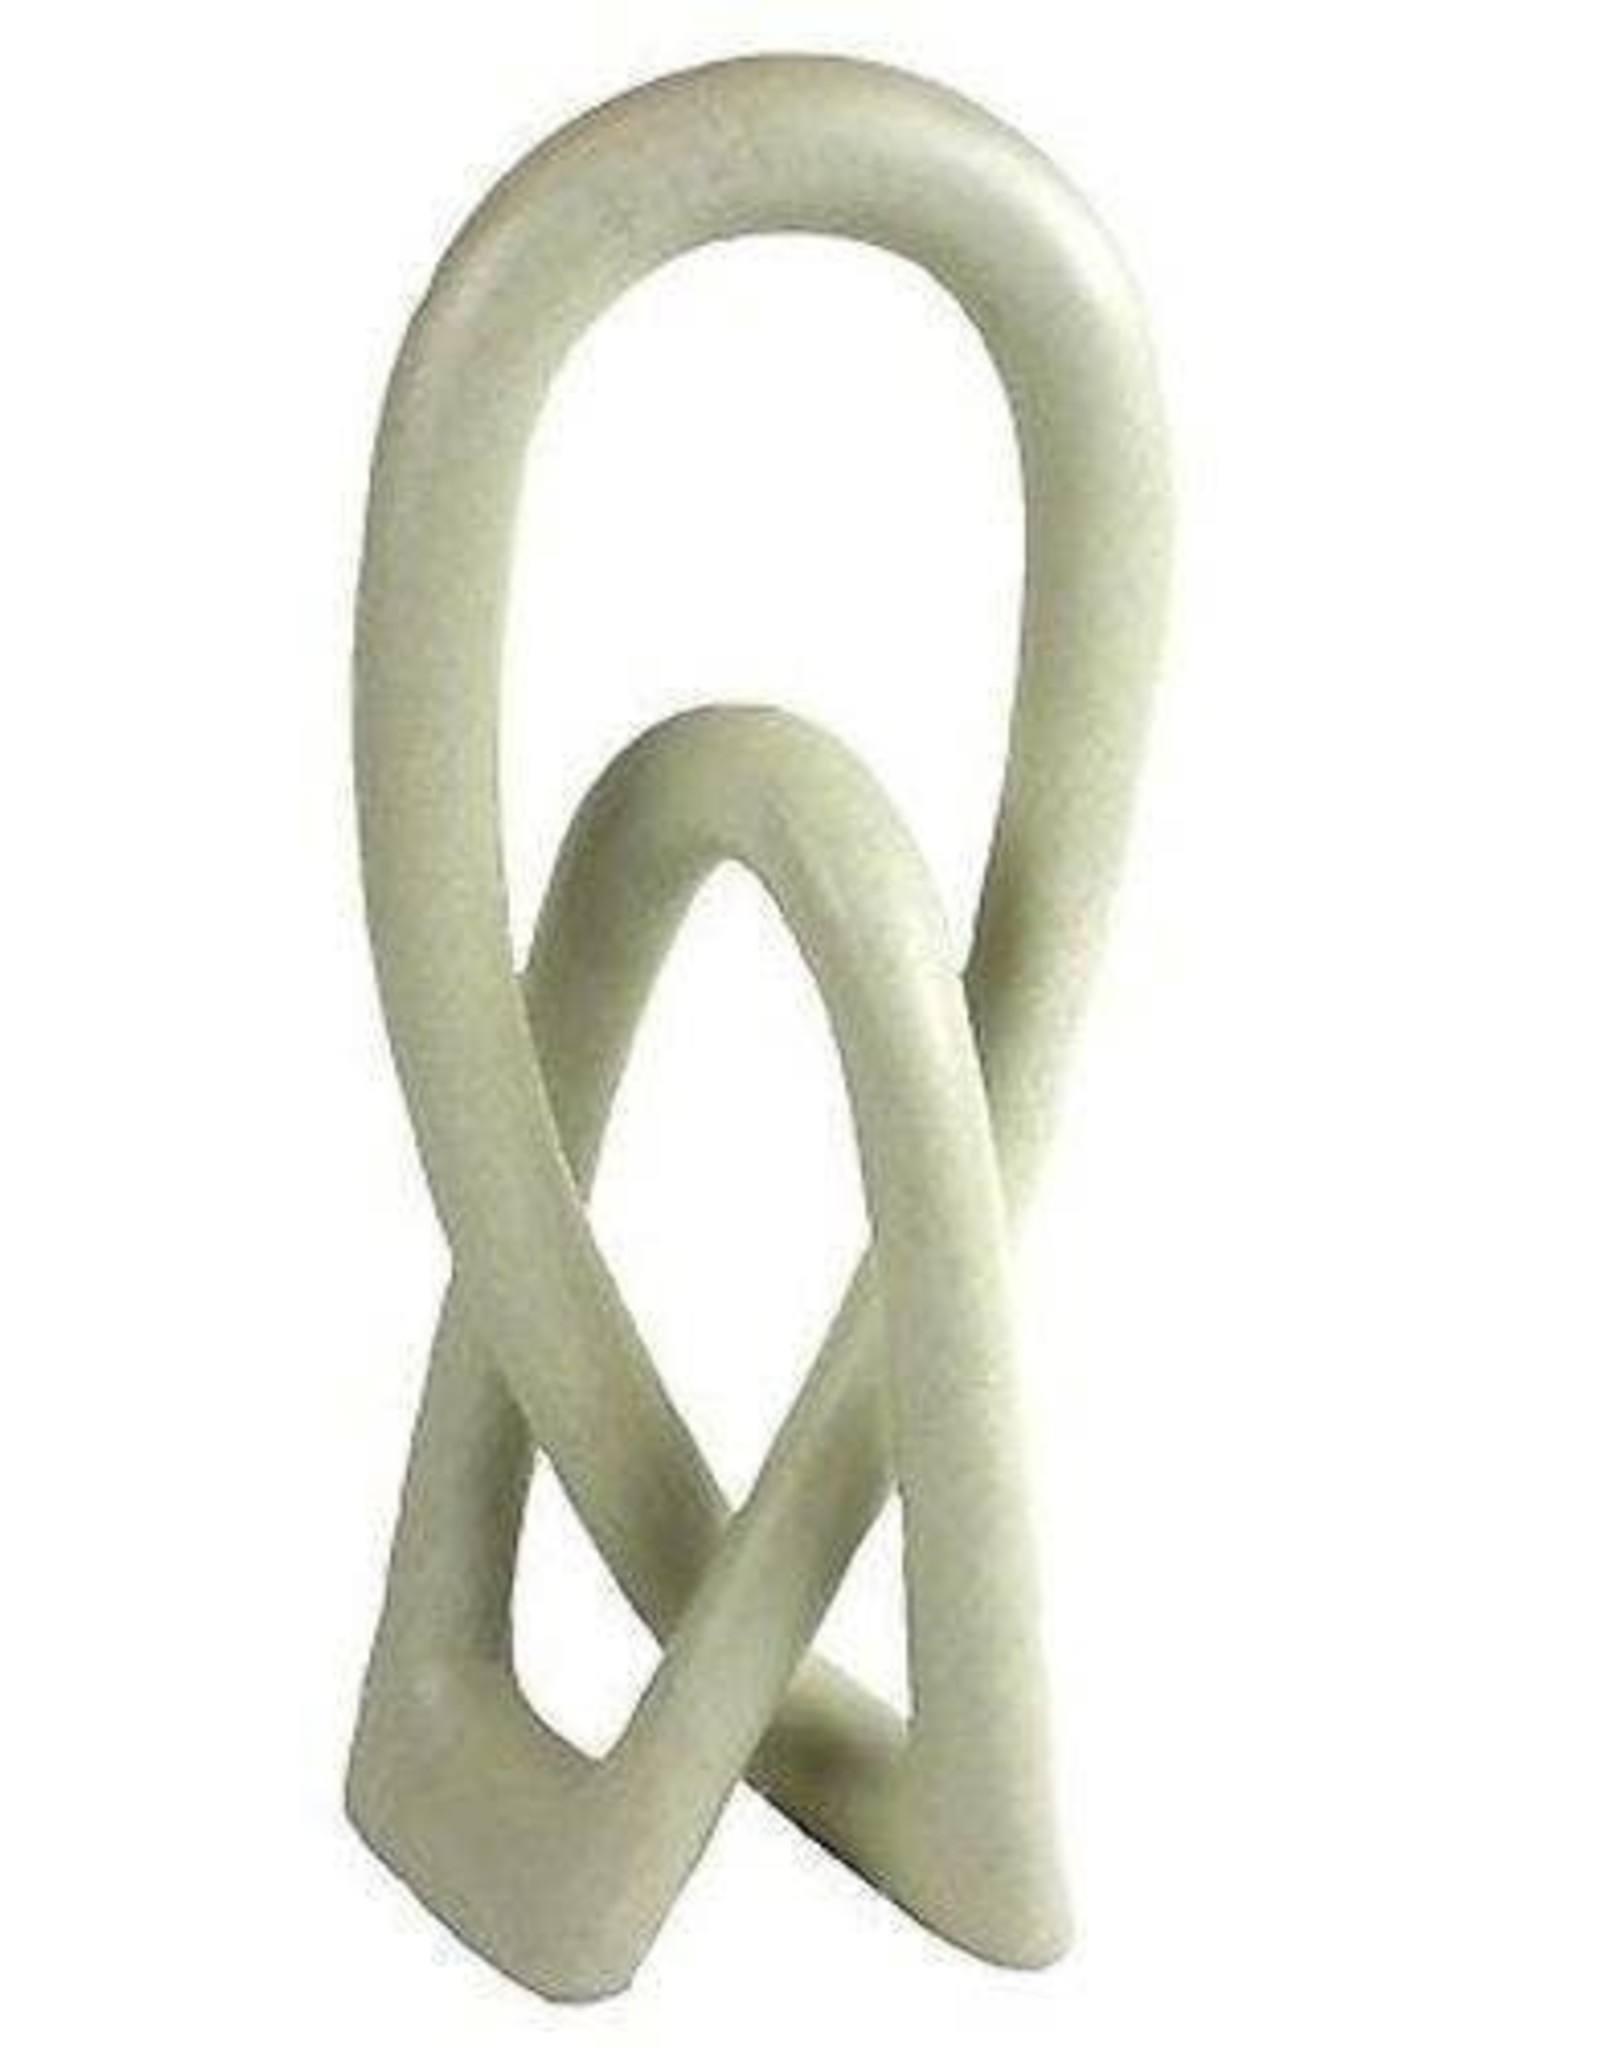 Global Crafts Lover's Knot Cream Stone 8" Sculpture